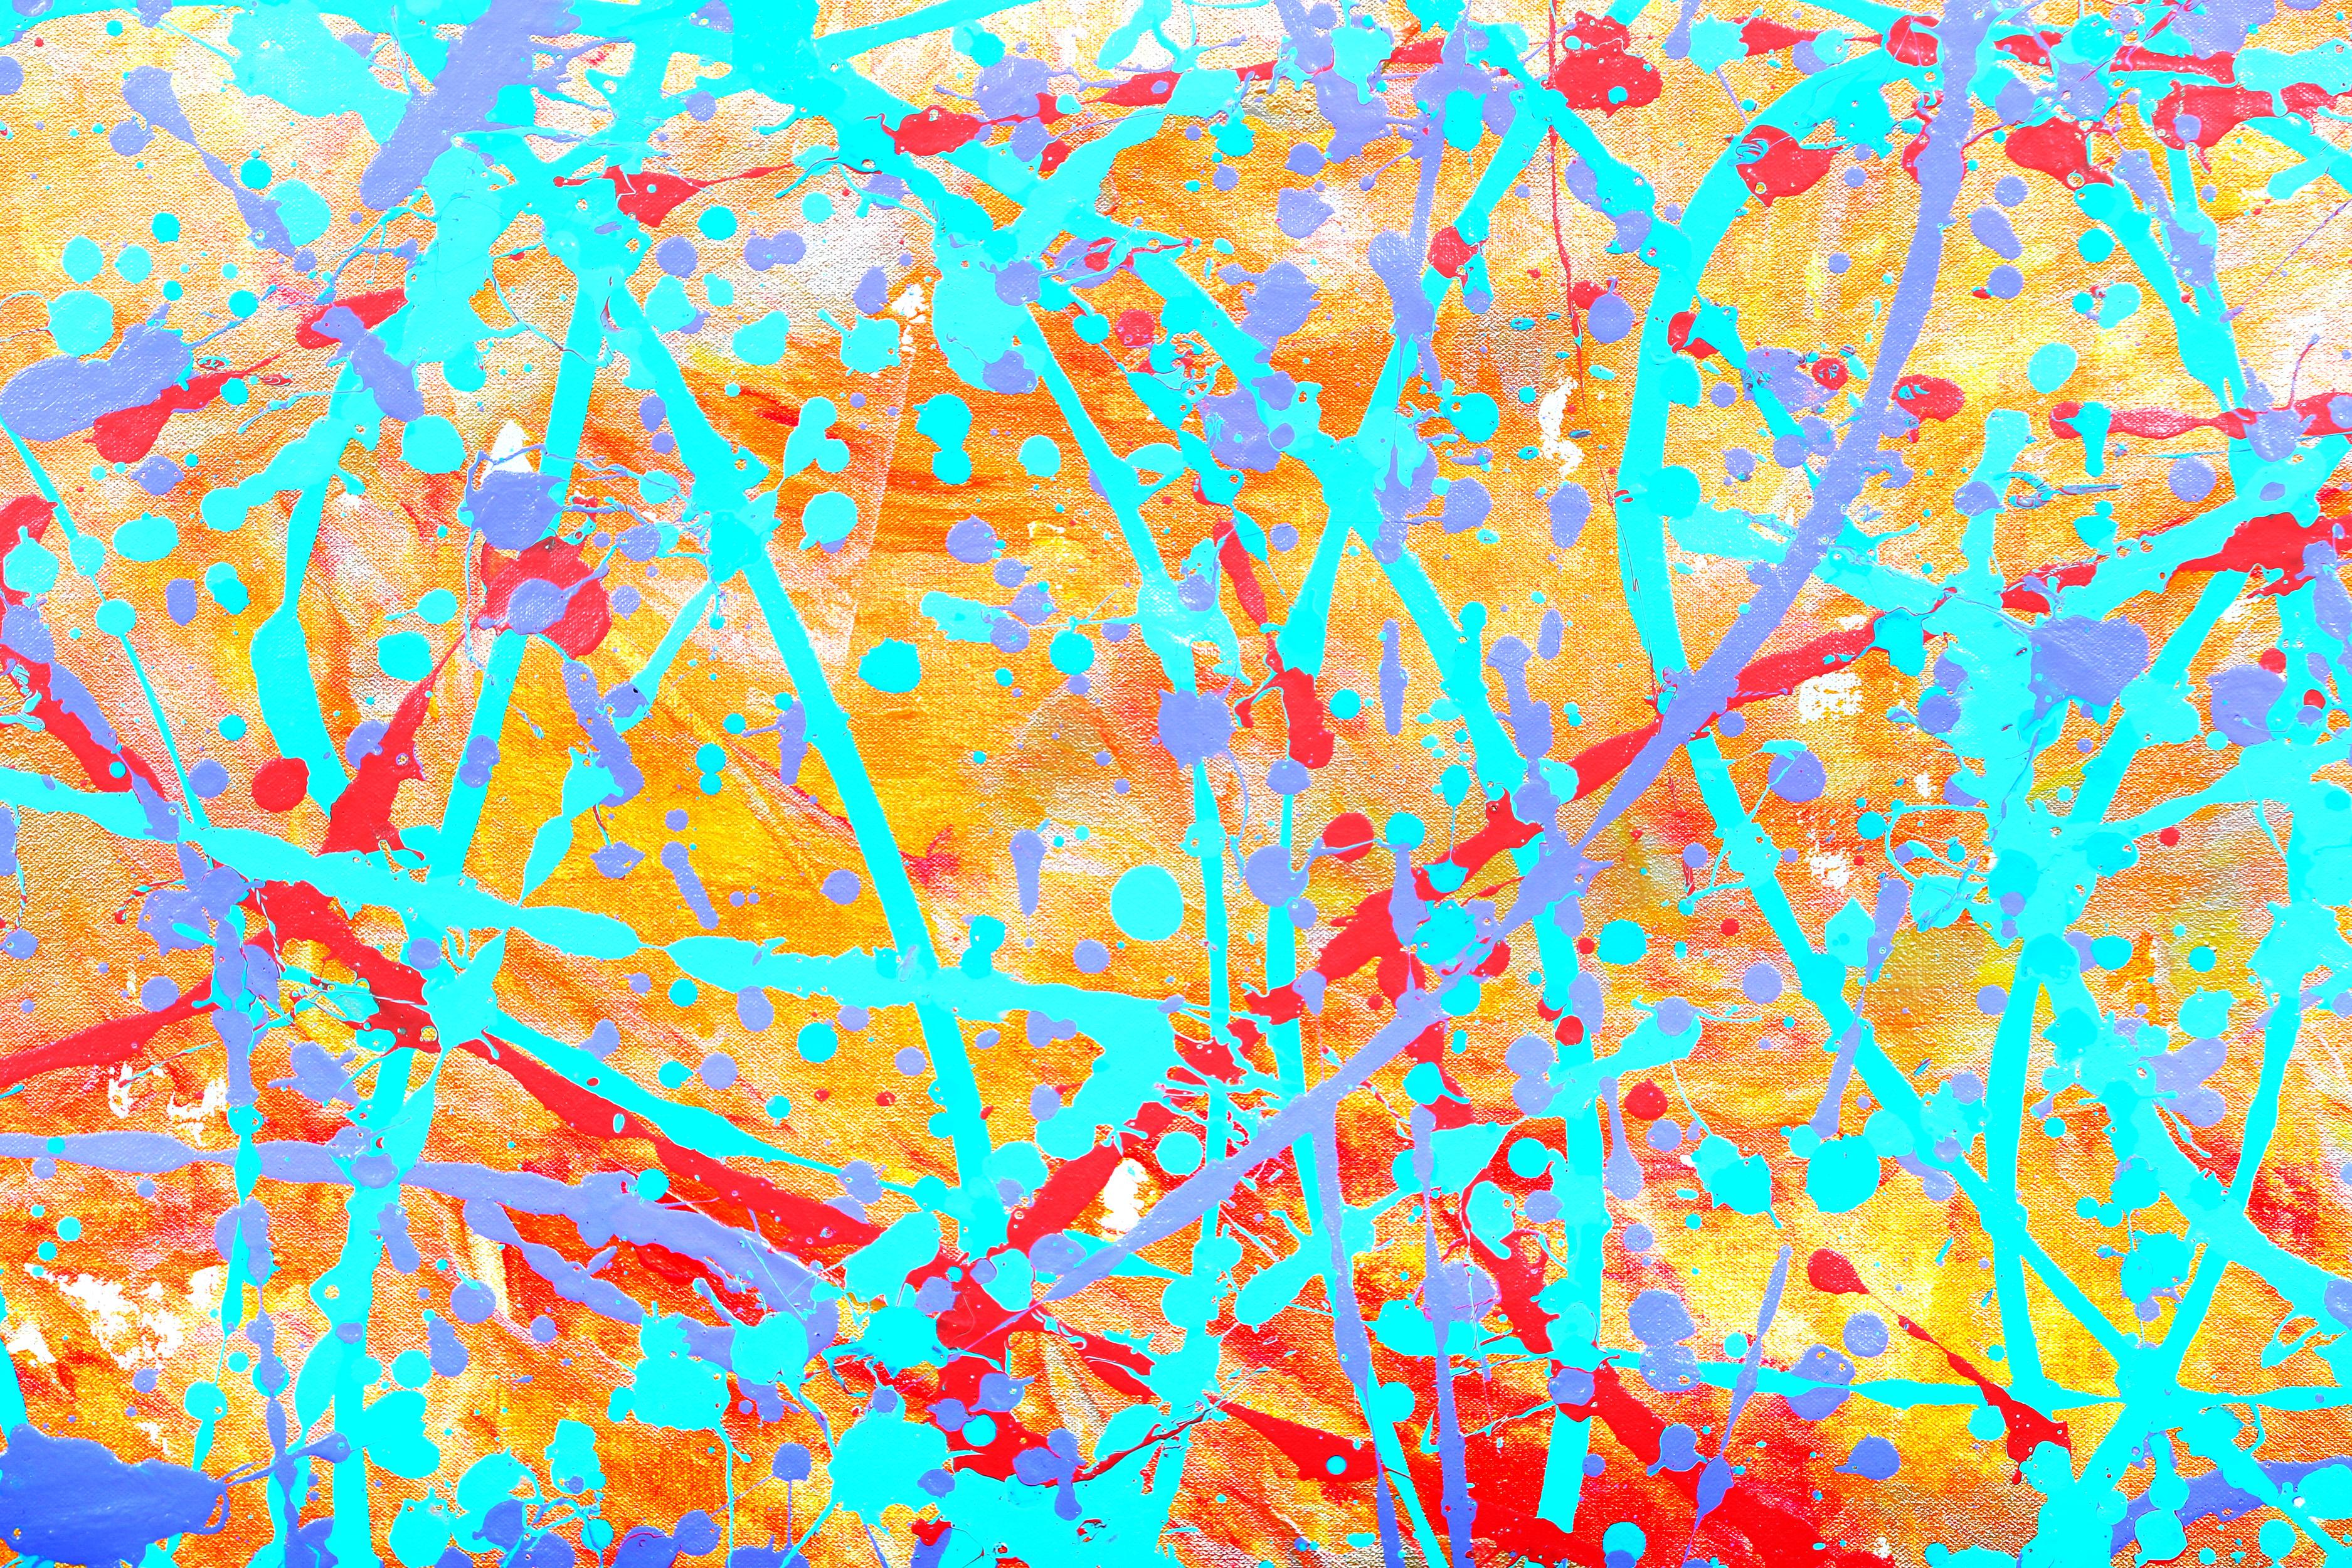 This painting explores an action painting with a glowing golden background. It represents the back emotions that are so powerful that they out shine the emotions we are trying to display. This work is painted in the style of abstract